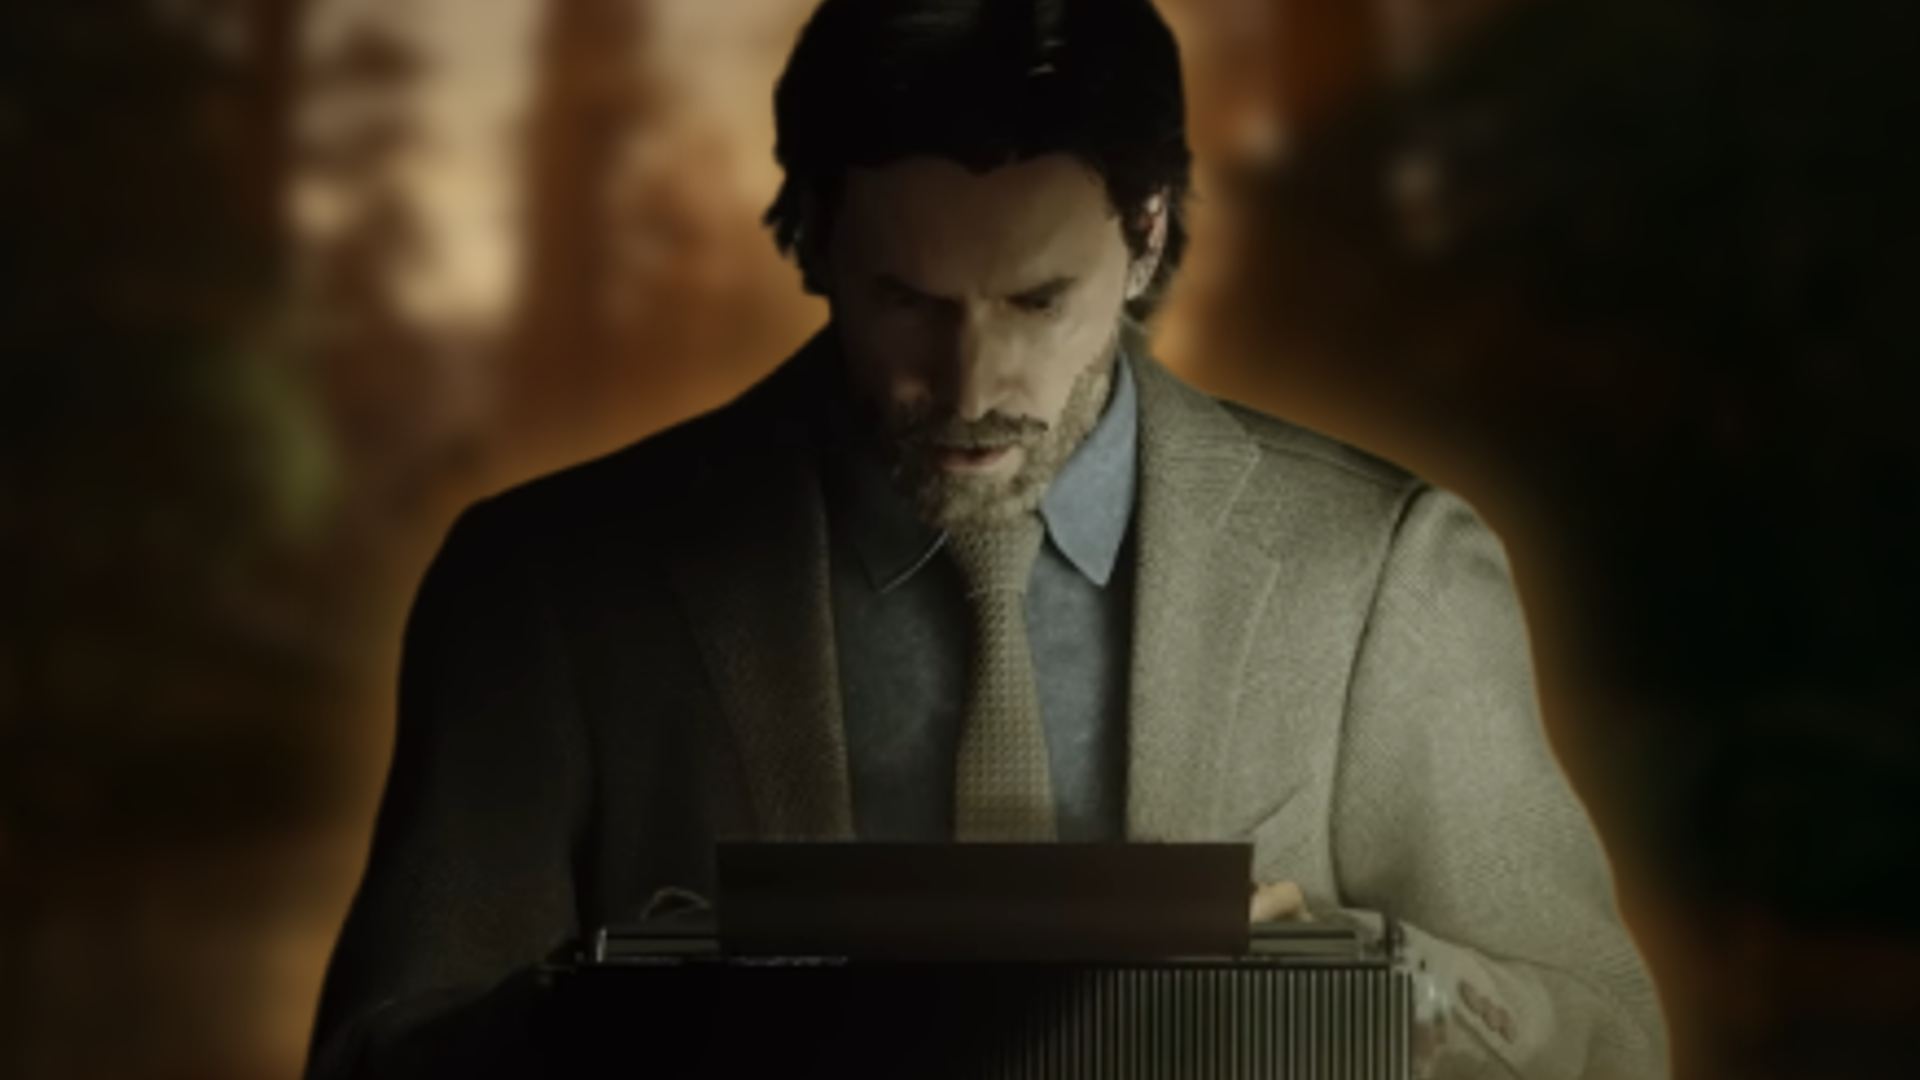 alan-wake-2-release-date-trailers-gameplay-story-details